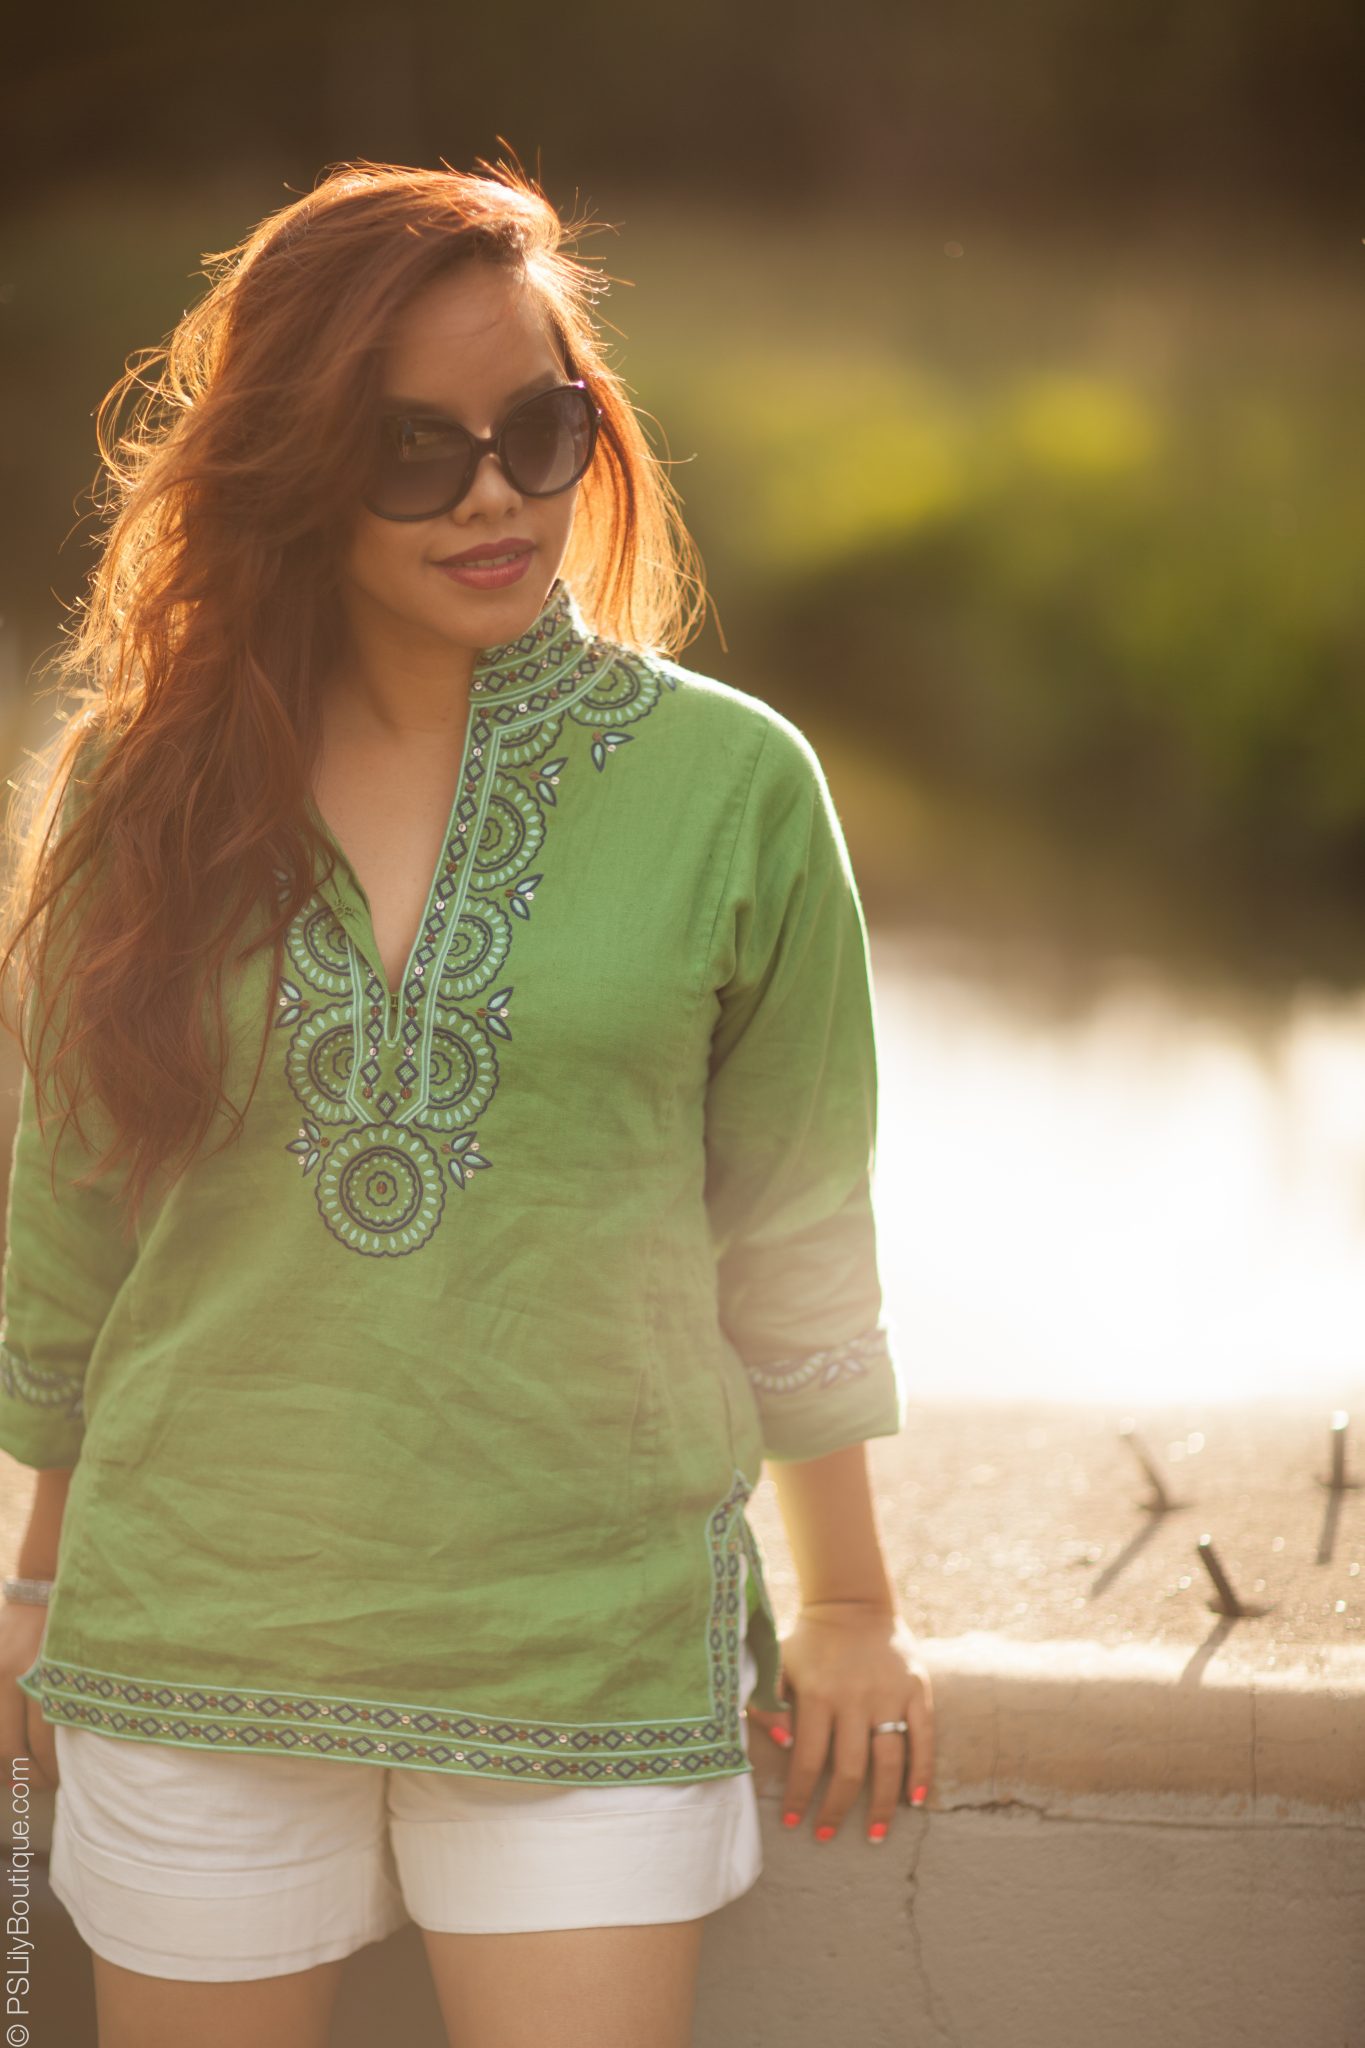 pslilyboutique-jcrew-green-embroidered-tunic-top-06-19-2015